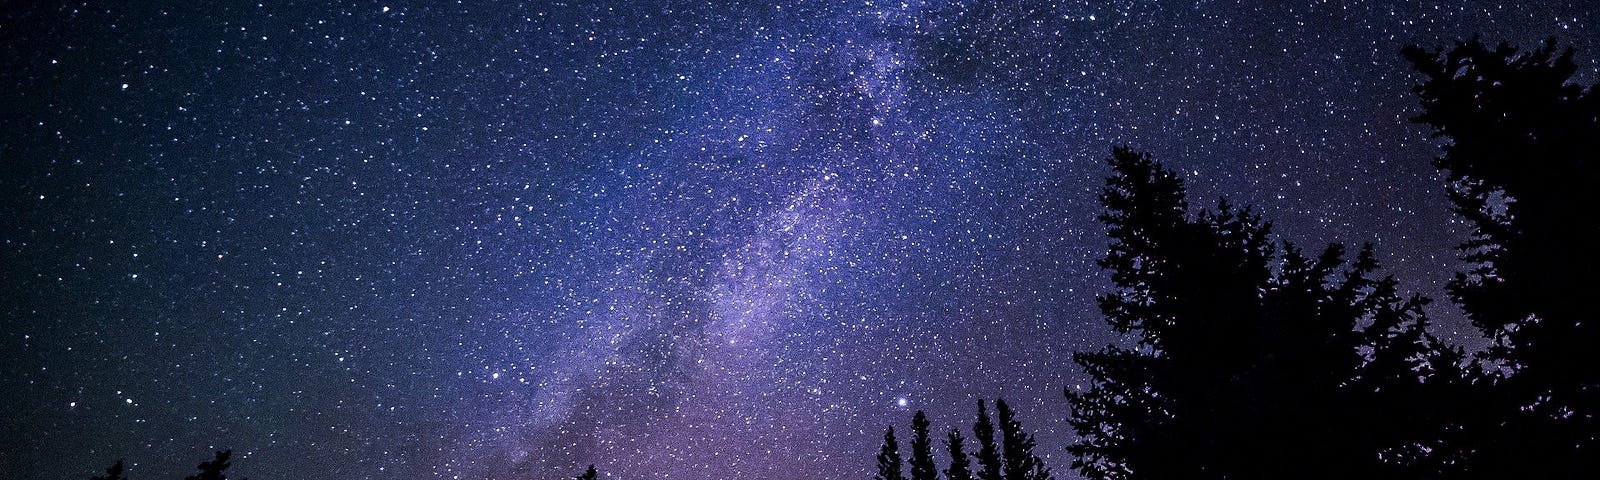 Decorative image of the Milky Way seen from a forest.